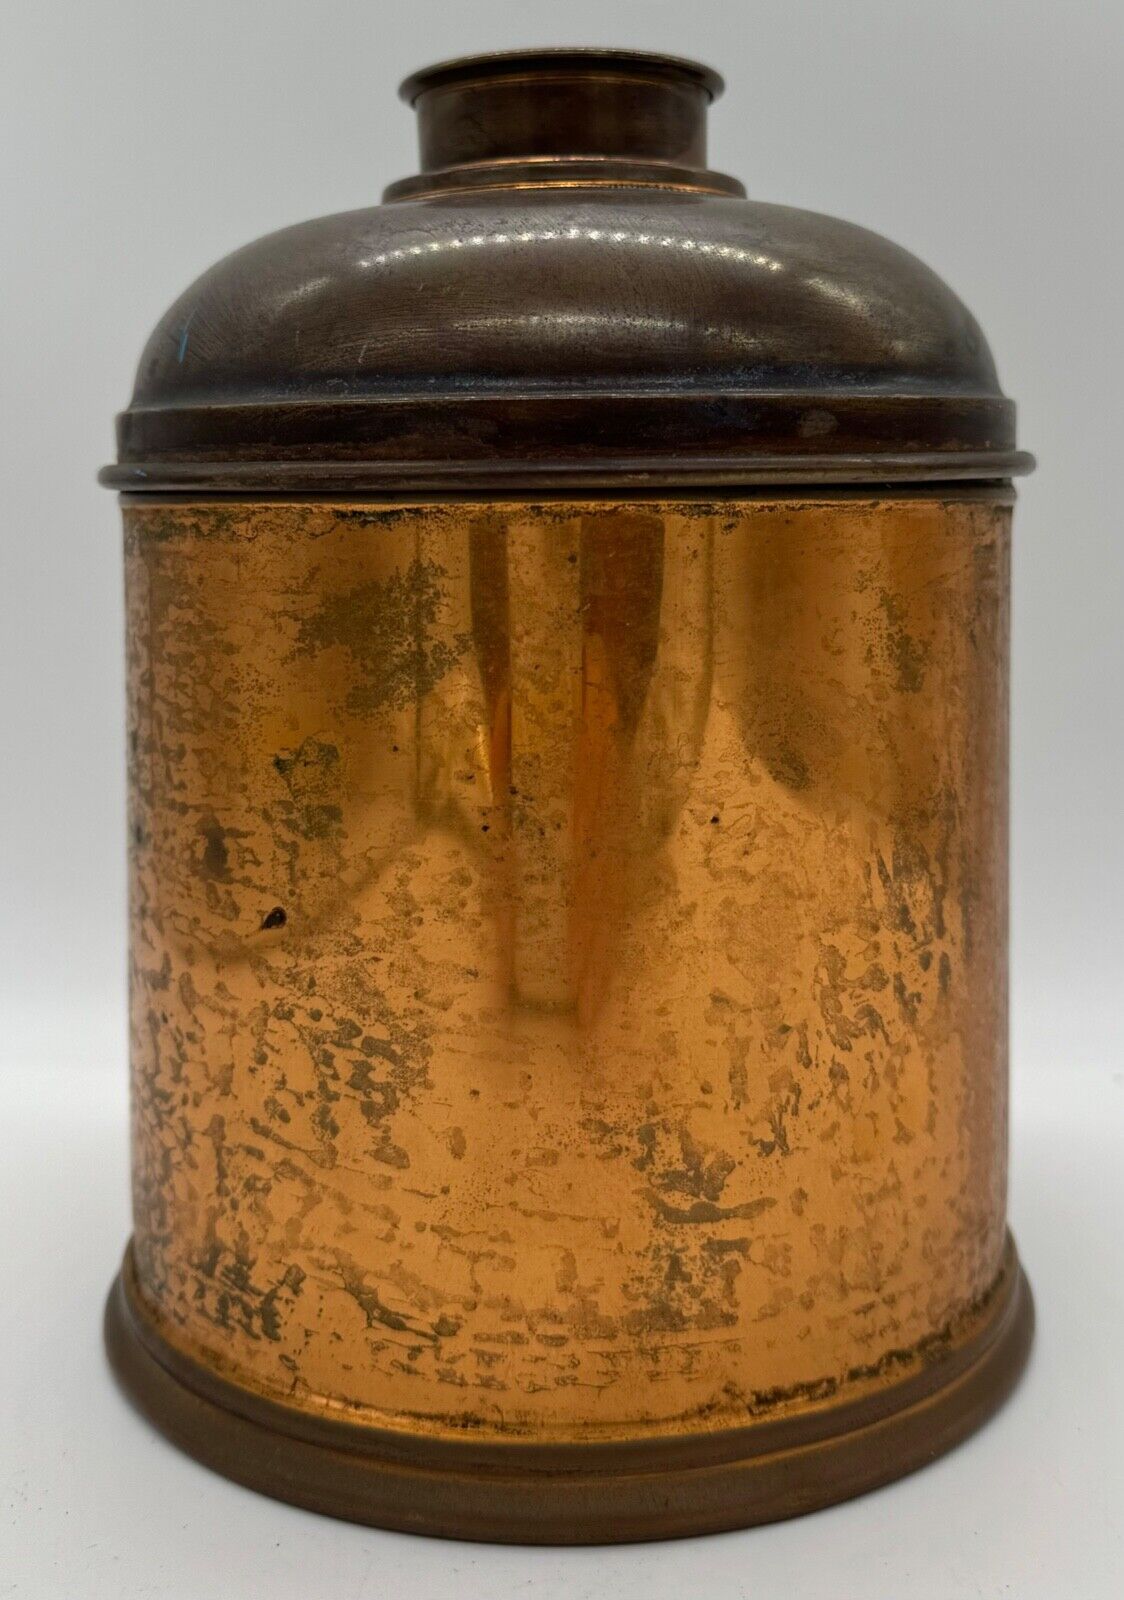 VINTAGE Copper, Brass &Tin Rumidor Tobacco Humidor/Canister RARE 1900's Piece